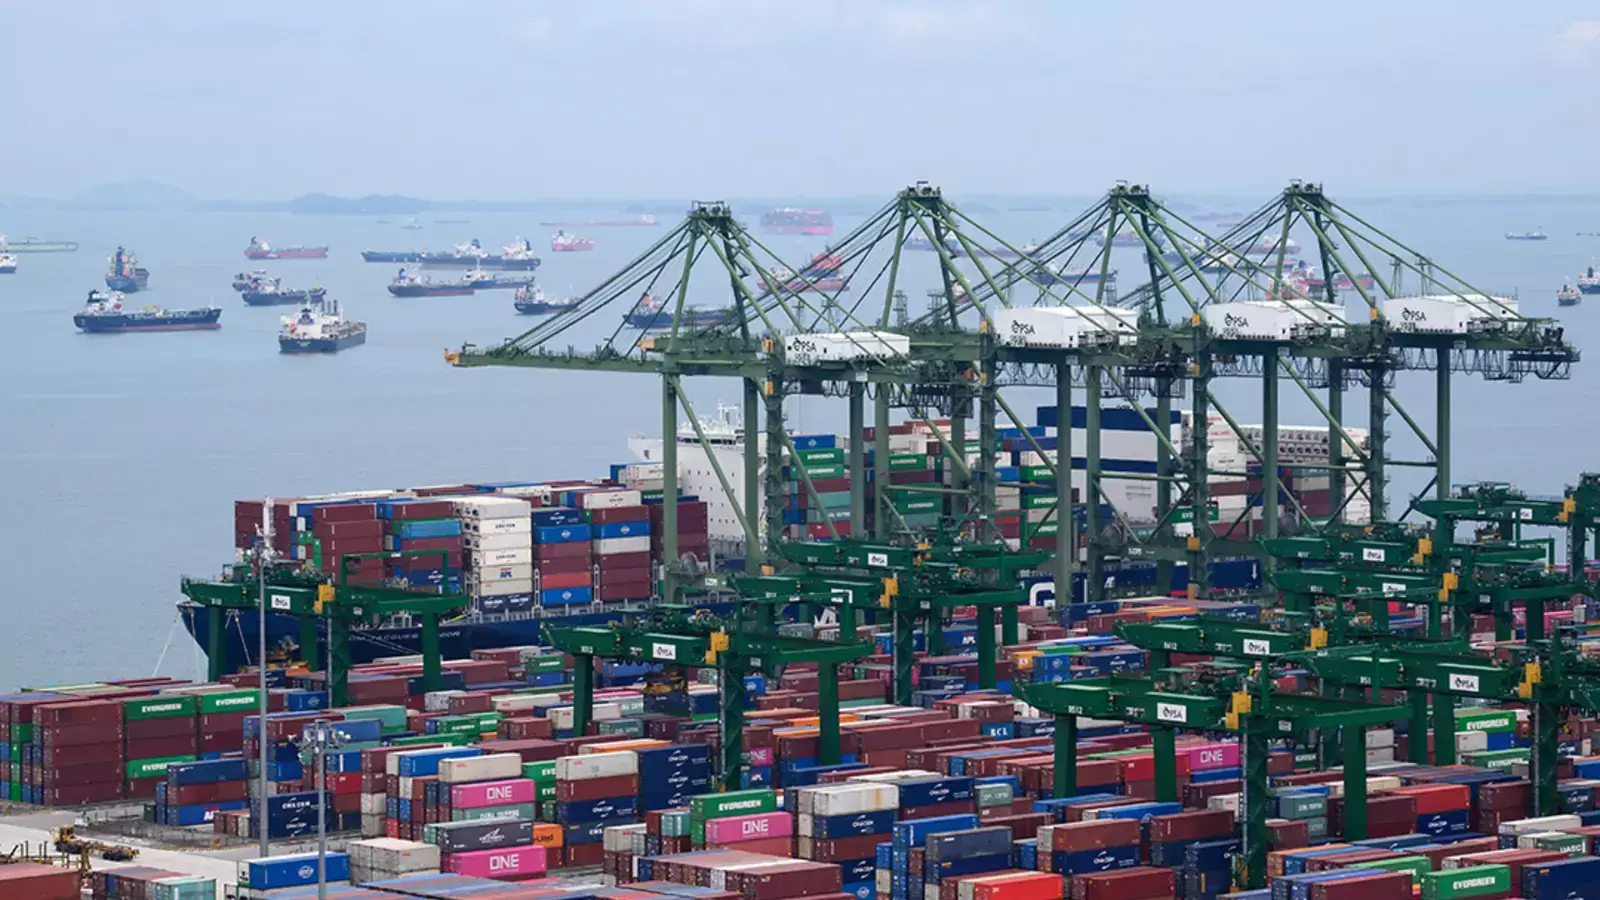 Containers are loaded at the Port of Singapore, the second largest port in the world.